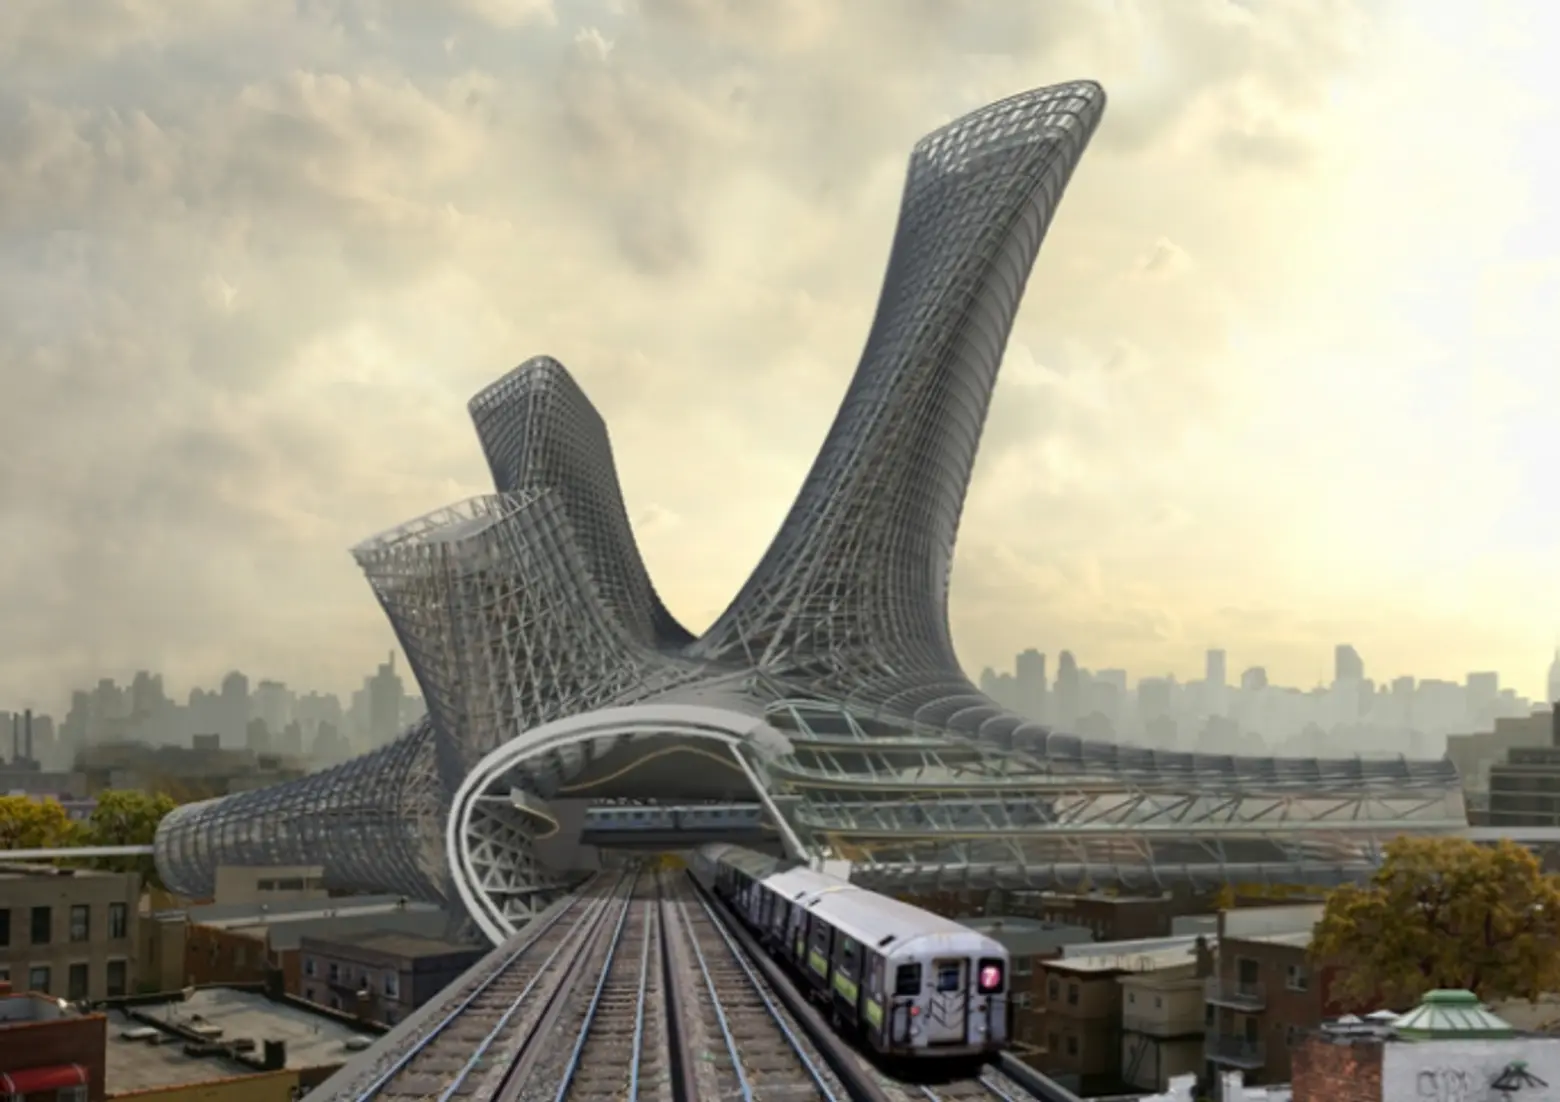 Amoeba-Shaped Transportation Hub Proposed for Queens